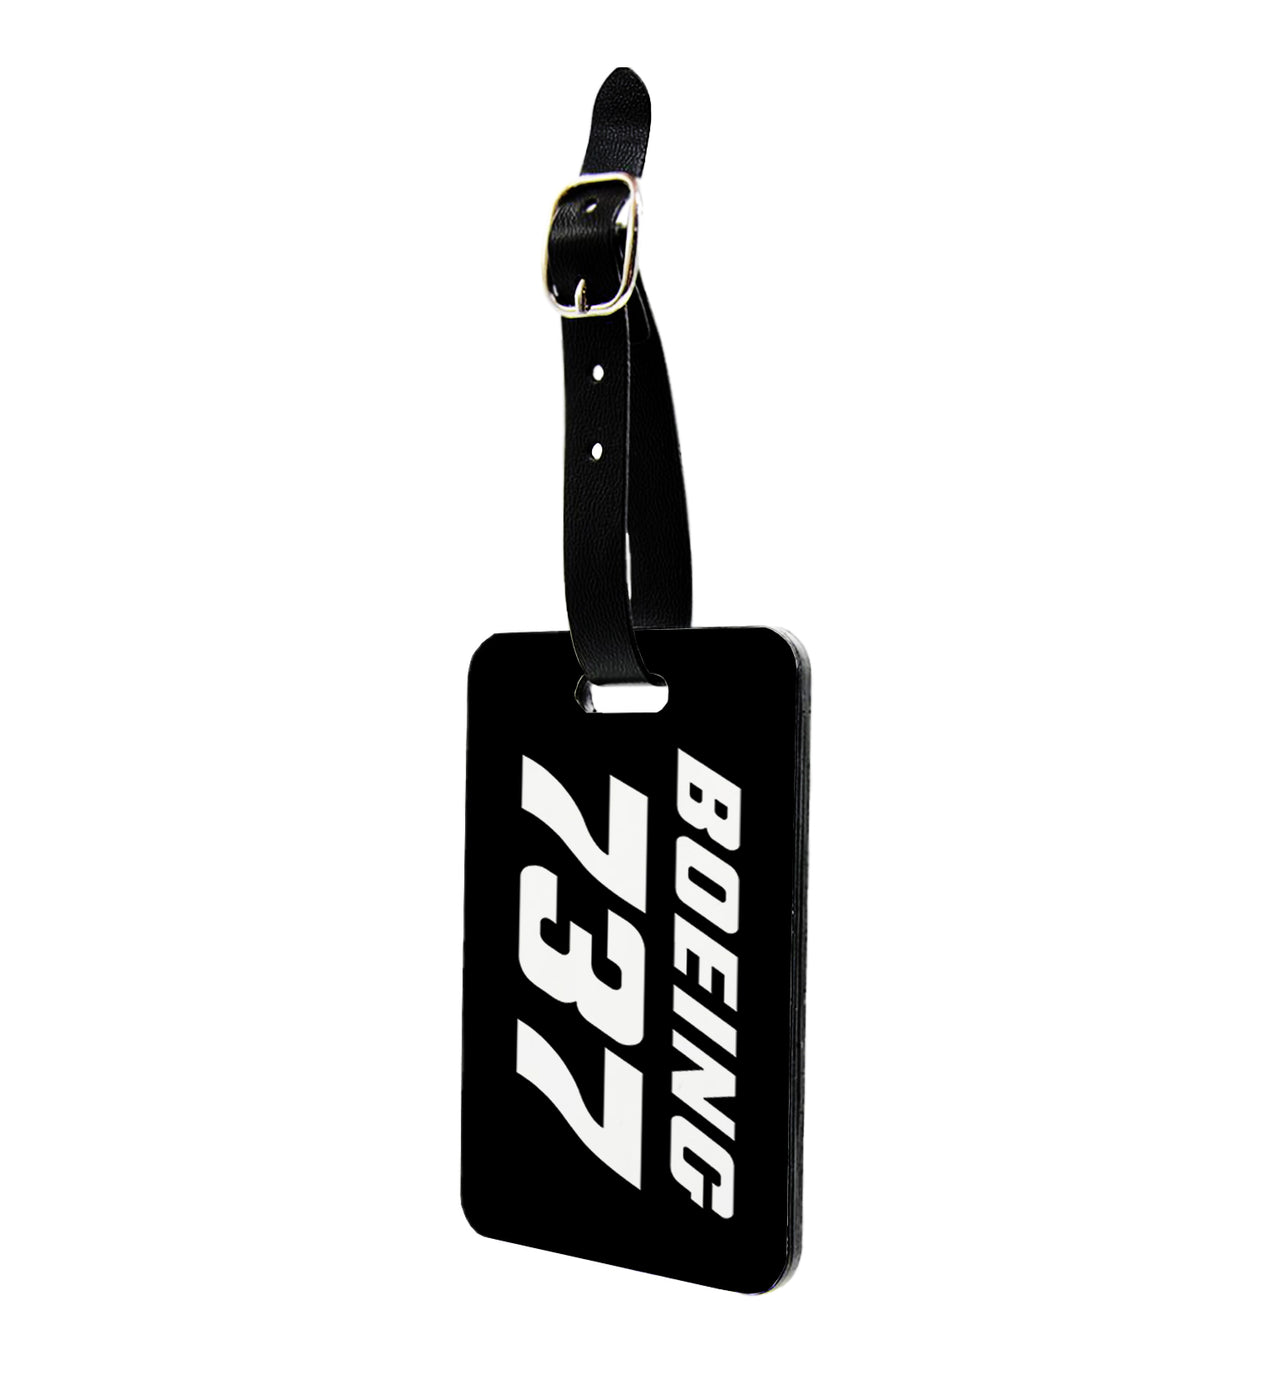 Boeing 737 & Text Designed Luggage Tag